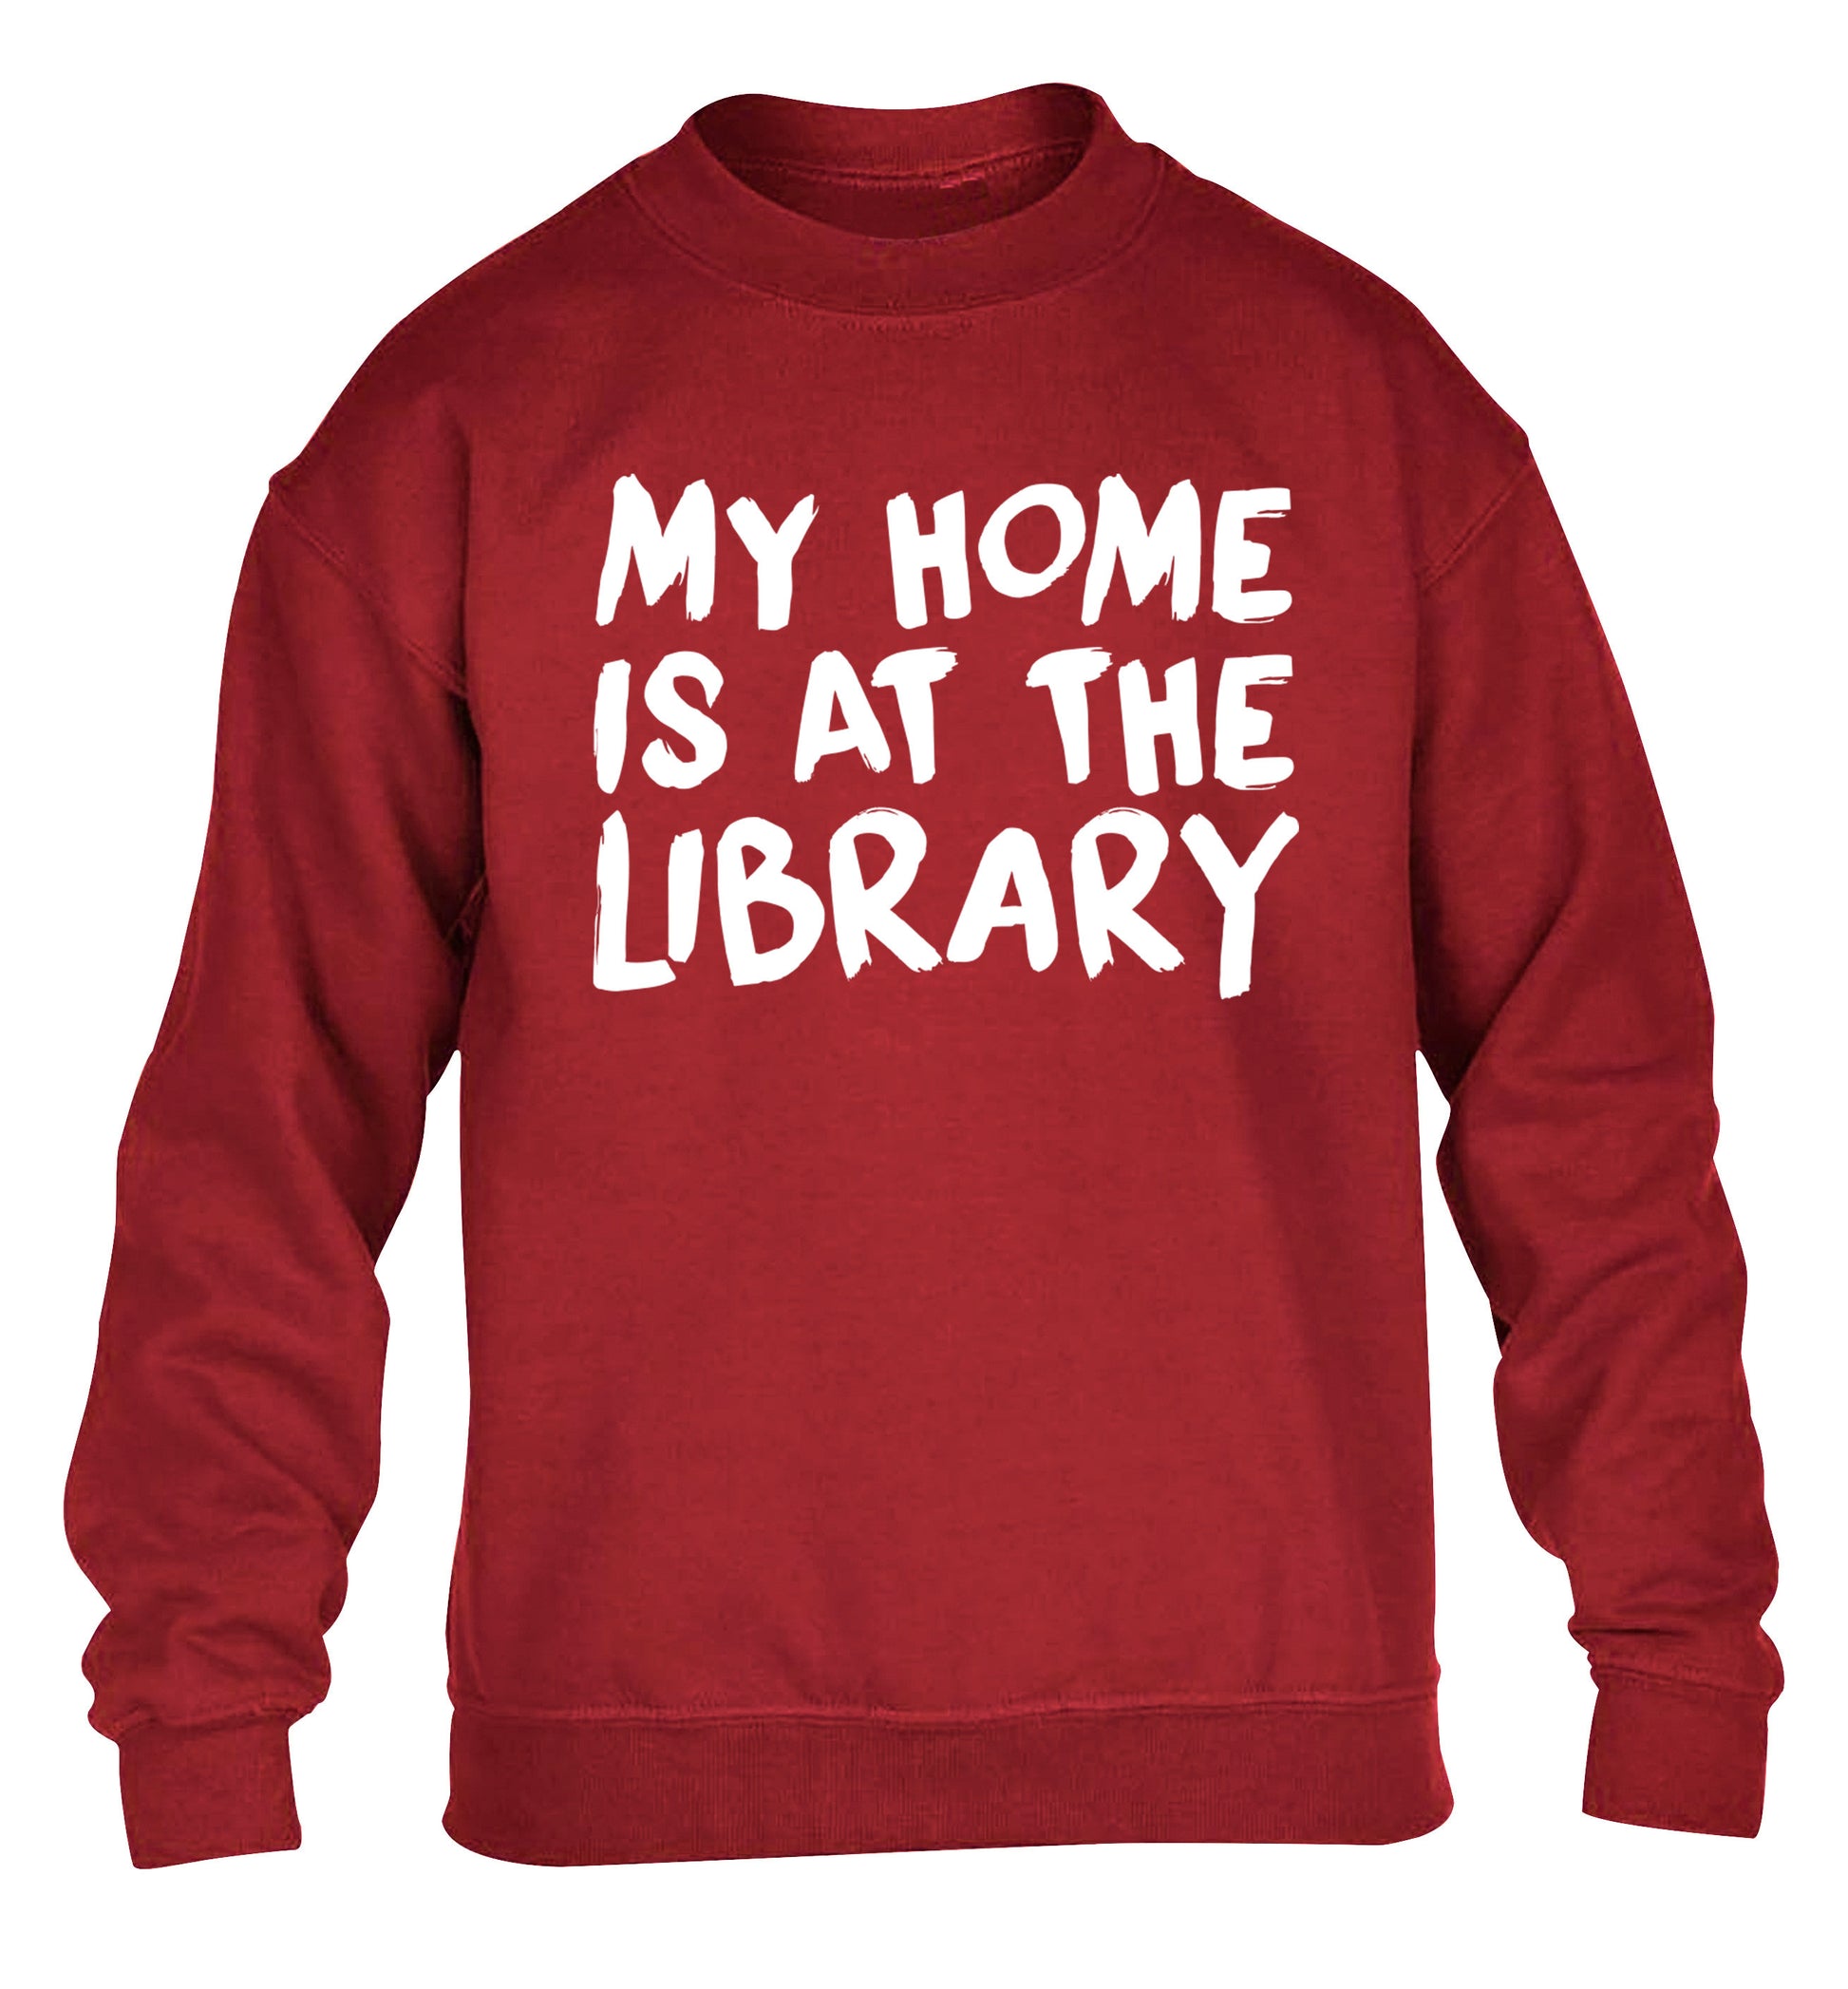 My home is at the library children's grey sweater 12-14 Years